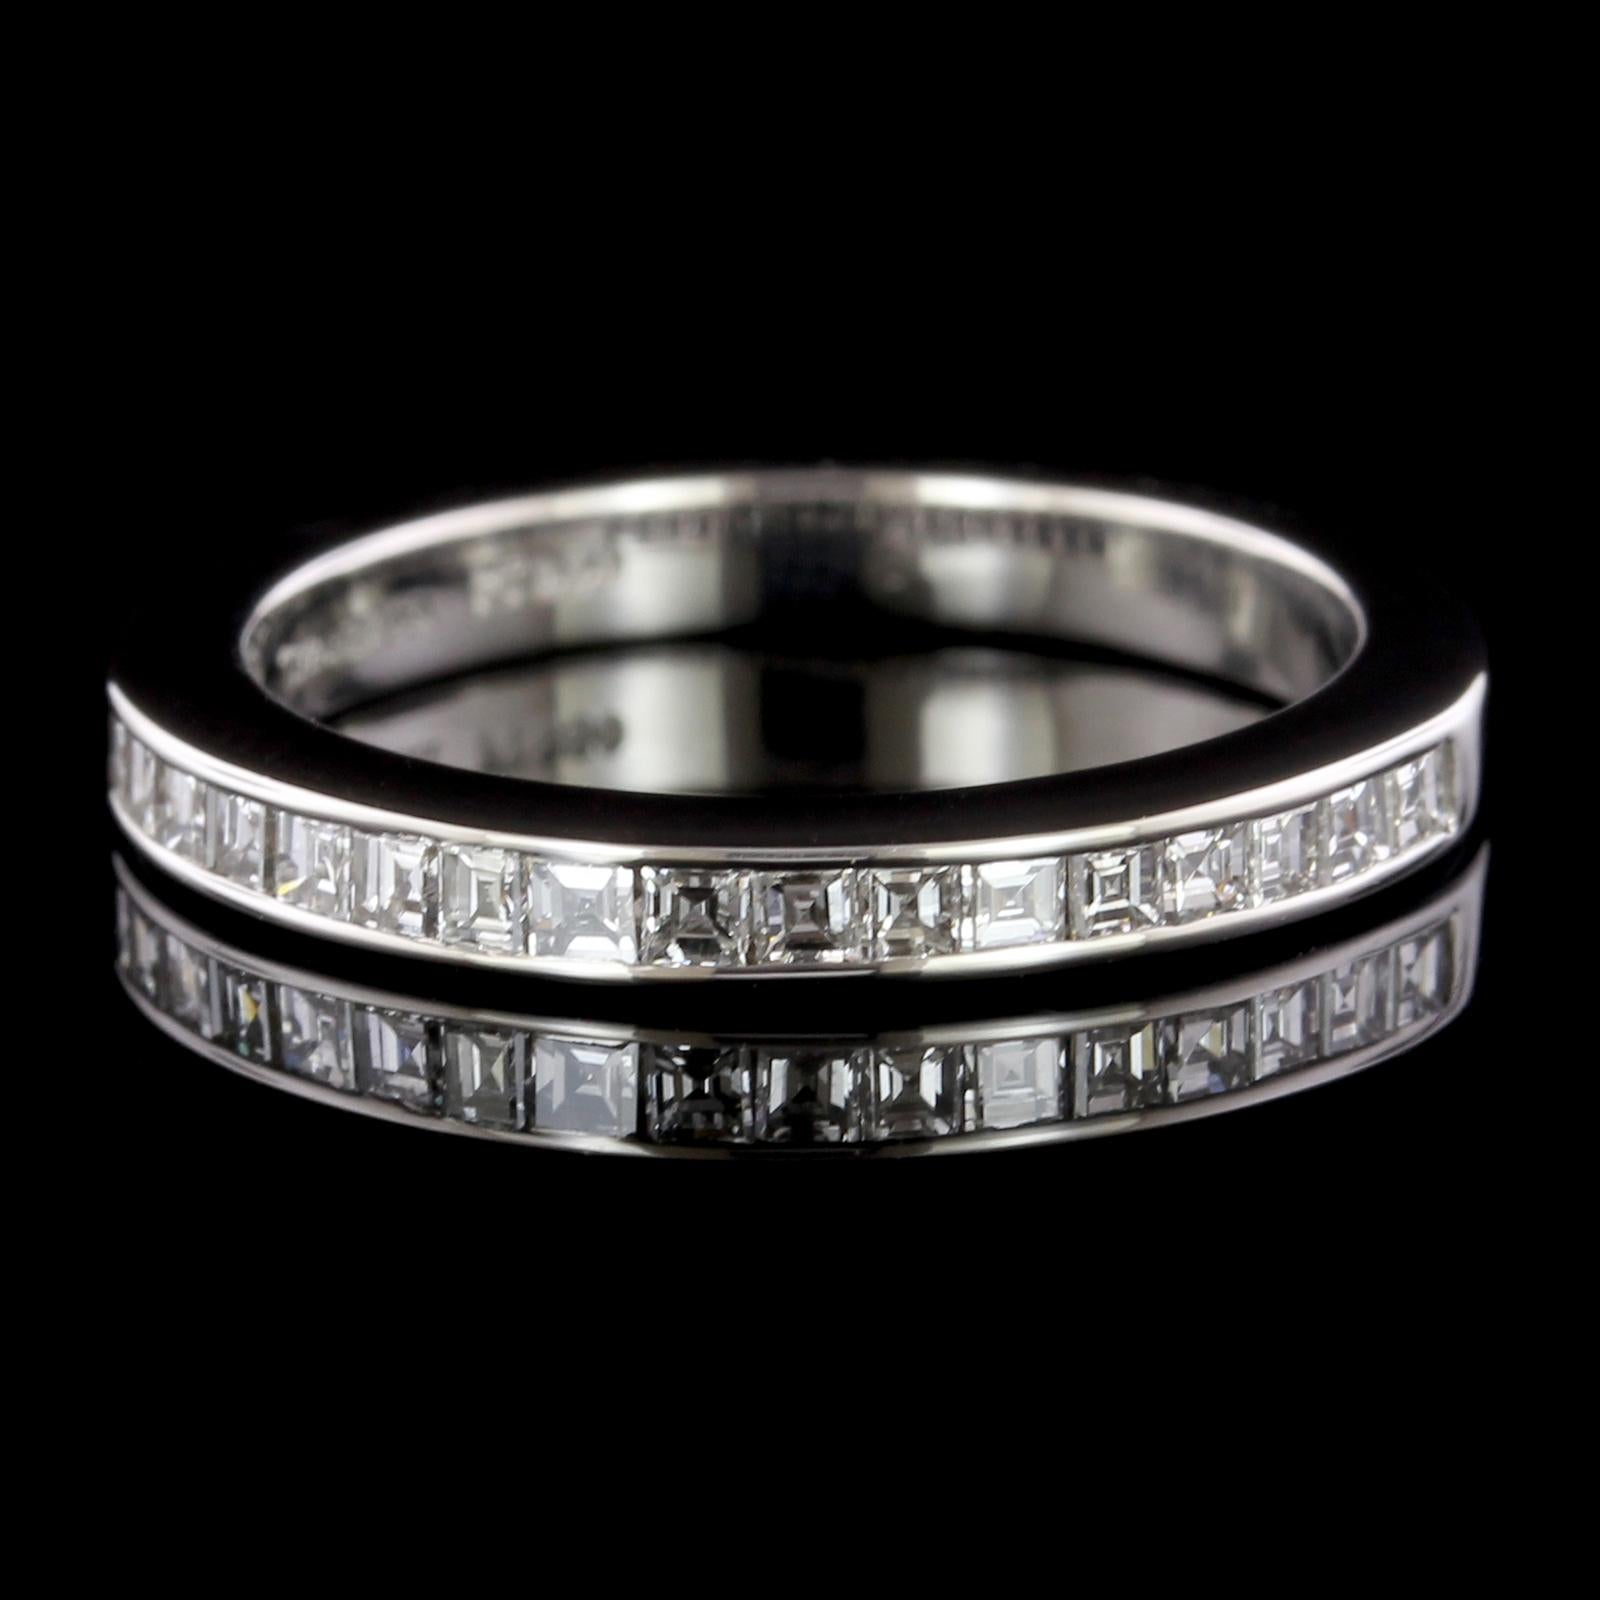 Tiffany & Co. Platinum Diamond Band. The band is channel set with 19 Asscher
cut diamonds, approx. total wt. .60cts., FG color, VS clarity, size 5 1/4.